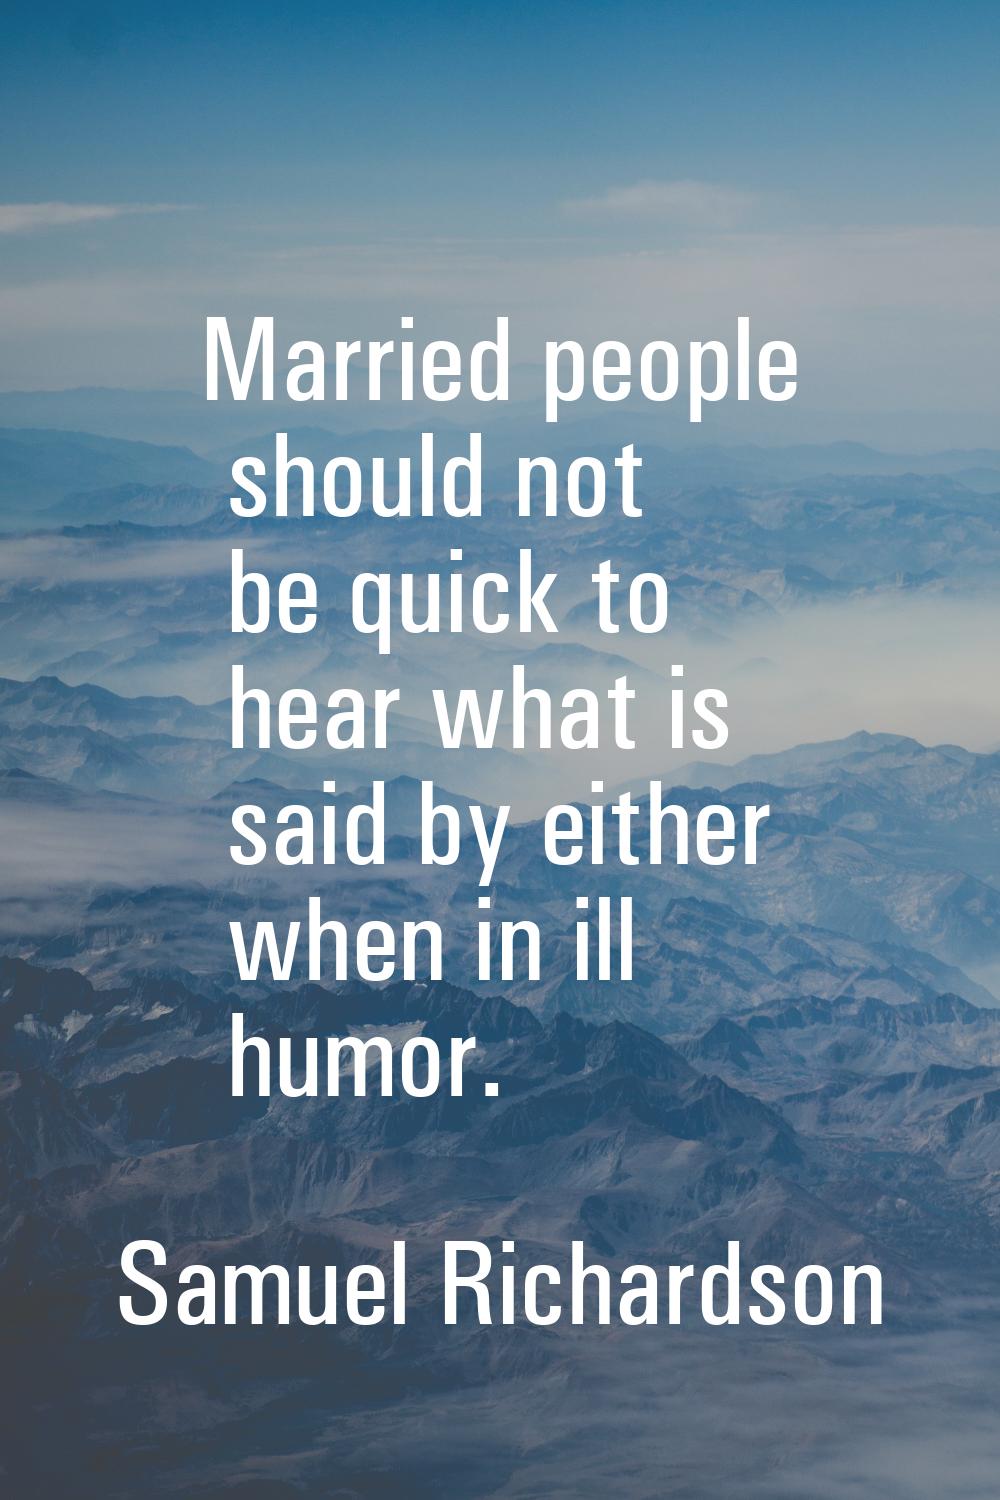 Married people should not be quick to hear what is said by either when in ill humor.